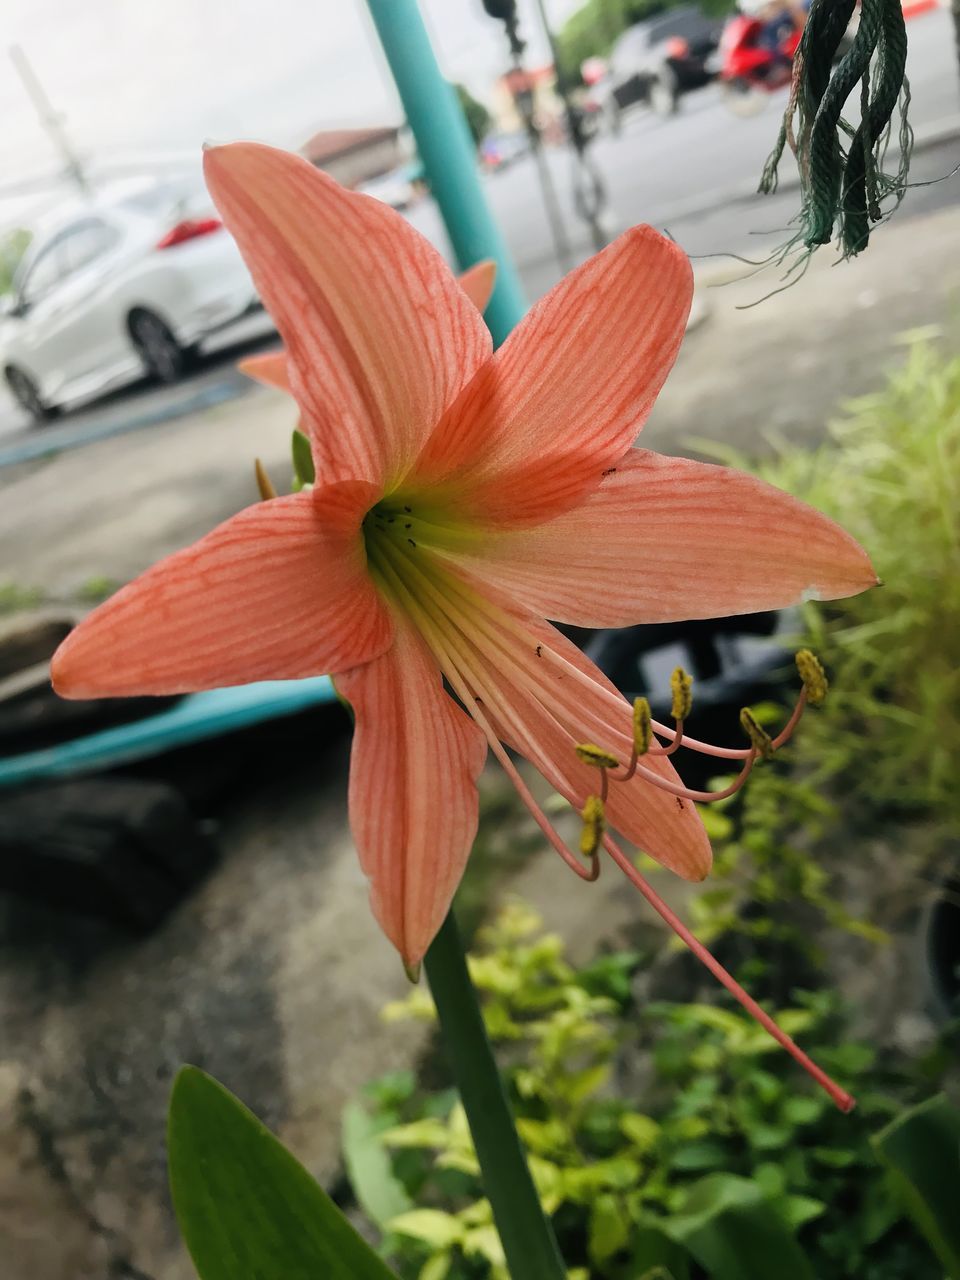 flower, plant, flowering plant, freshness, close-up, beauty in nature, lily, nature, growth, petal, focus on foreground, flower head, fragility, day, no people, leaf, inflorescence, outdoors, pollen, wheel, botany